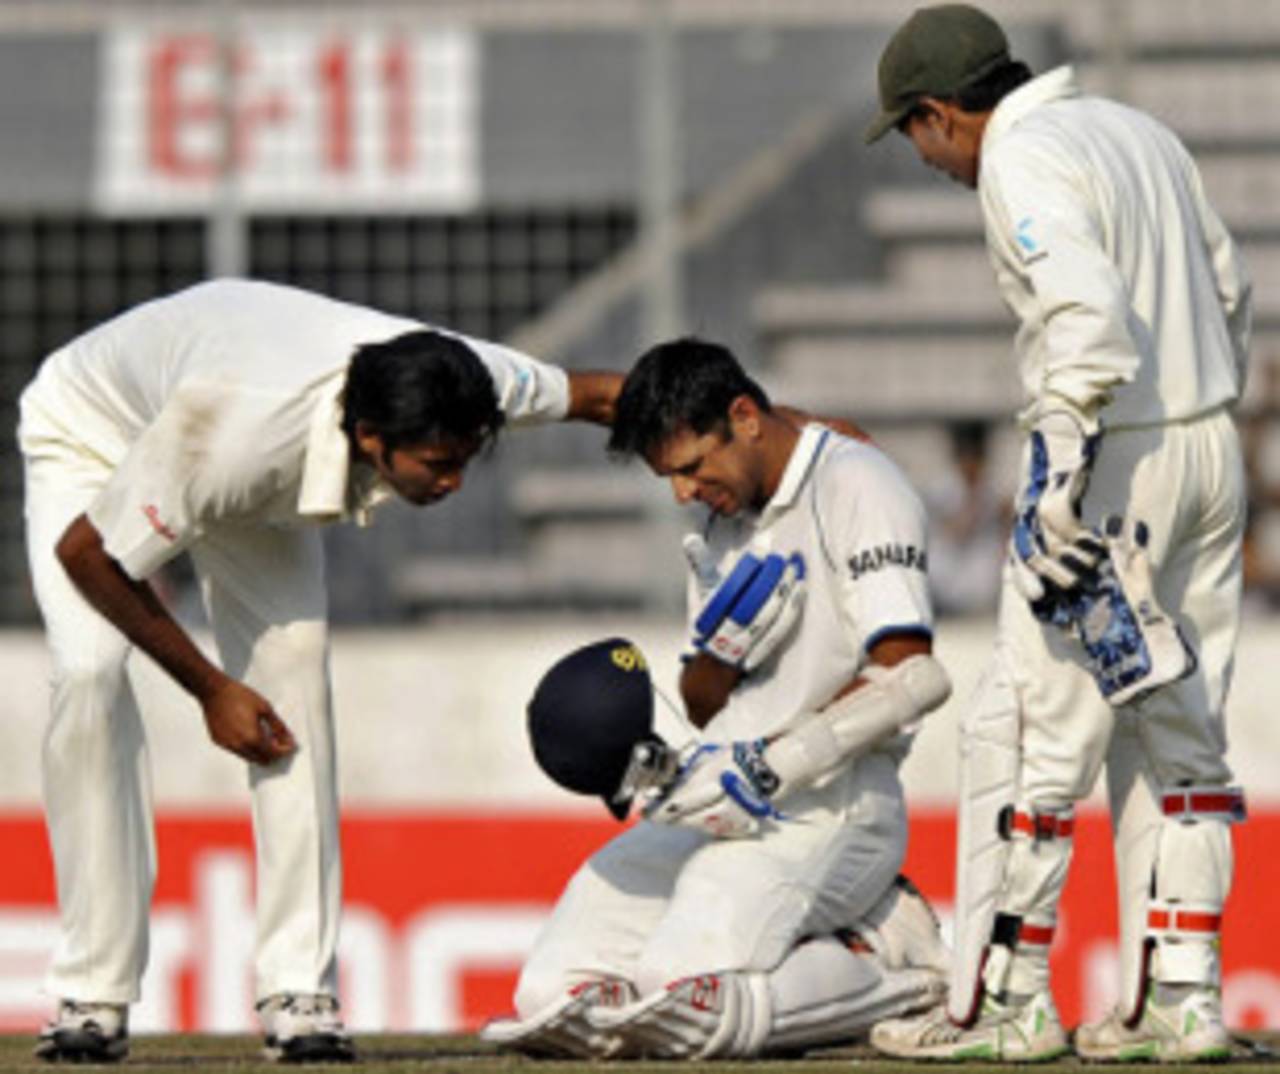 The recent injury to Rahul Dravid could upset the balance of India's batting&nbsp;&nbsp;&bull;&nbsp;&nbsp;Associated Press